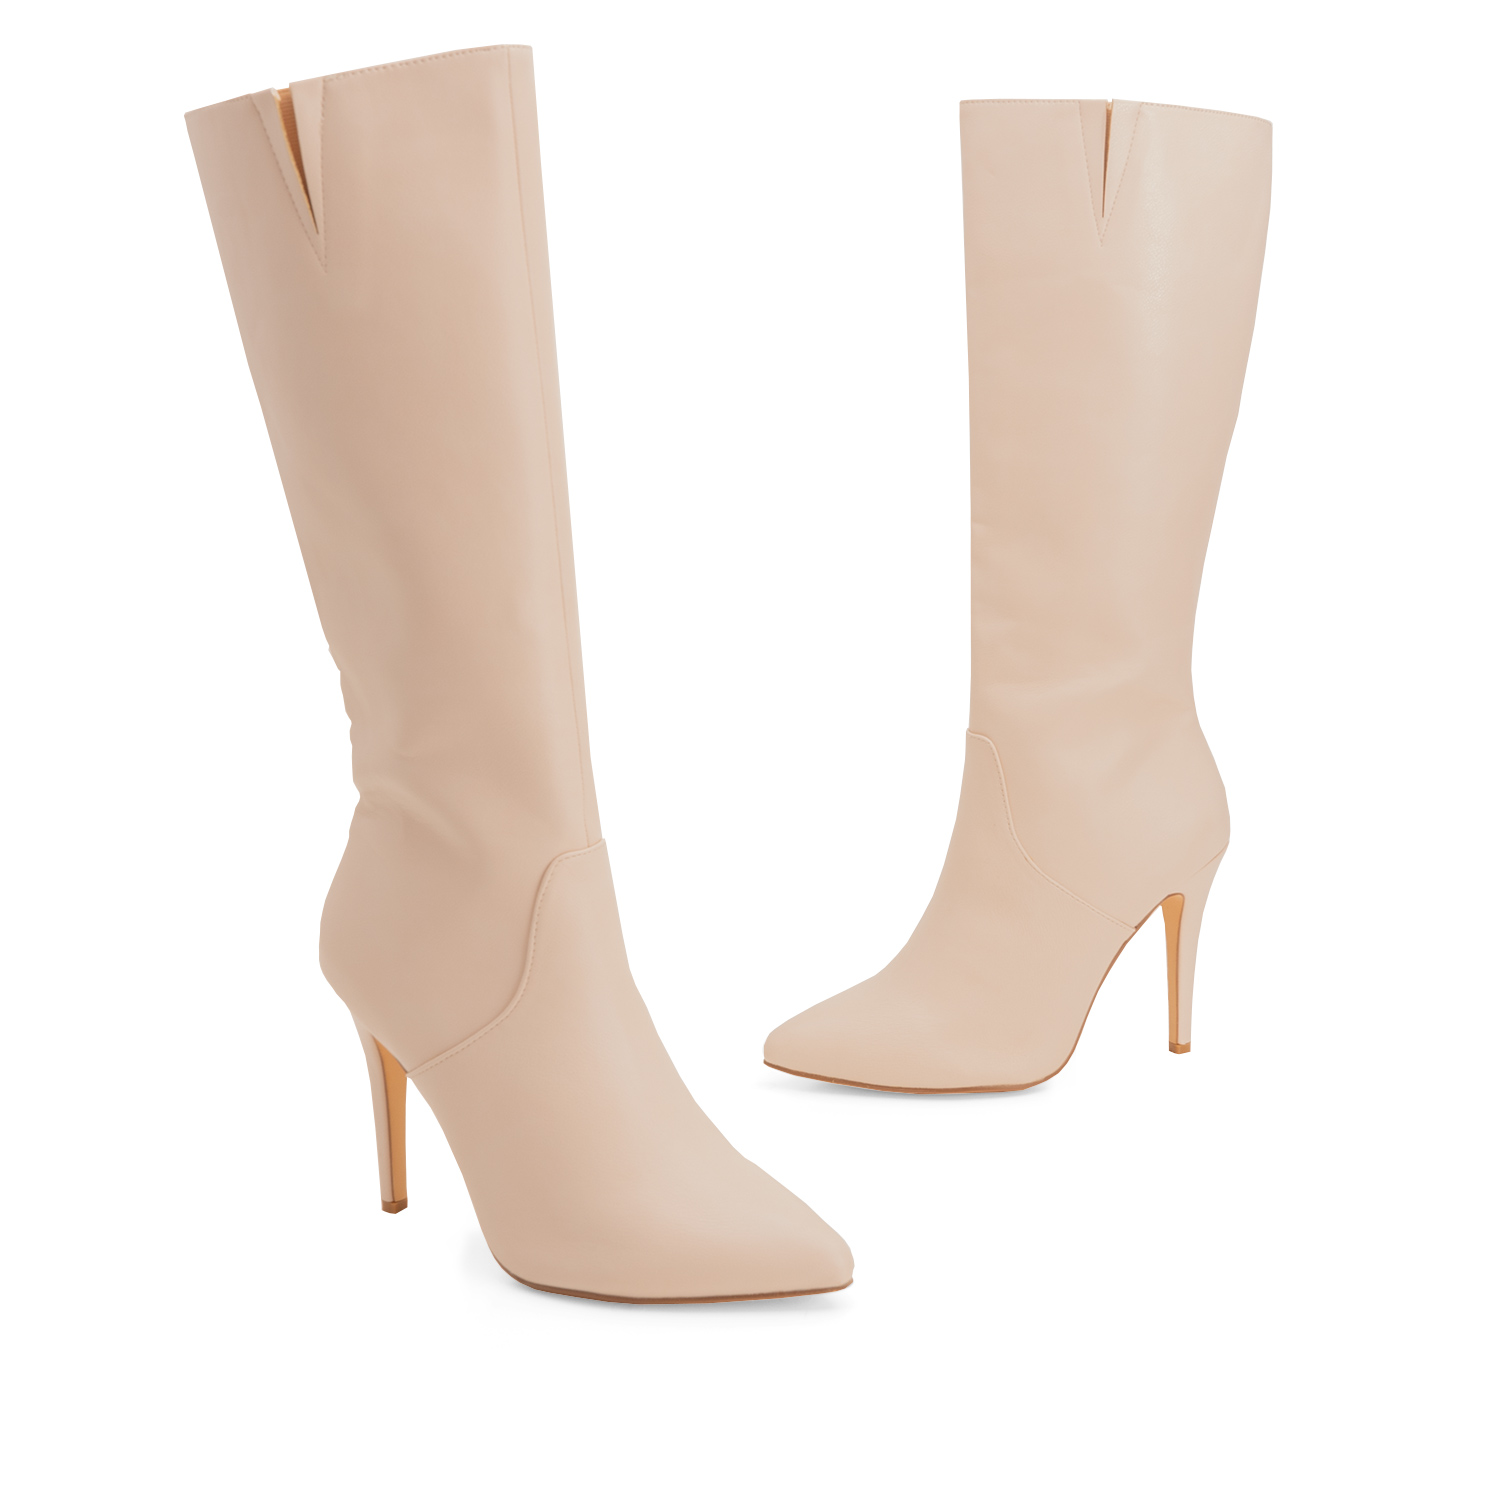 Heeled boots in ivory faux leather 